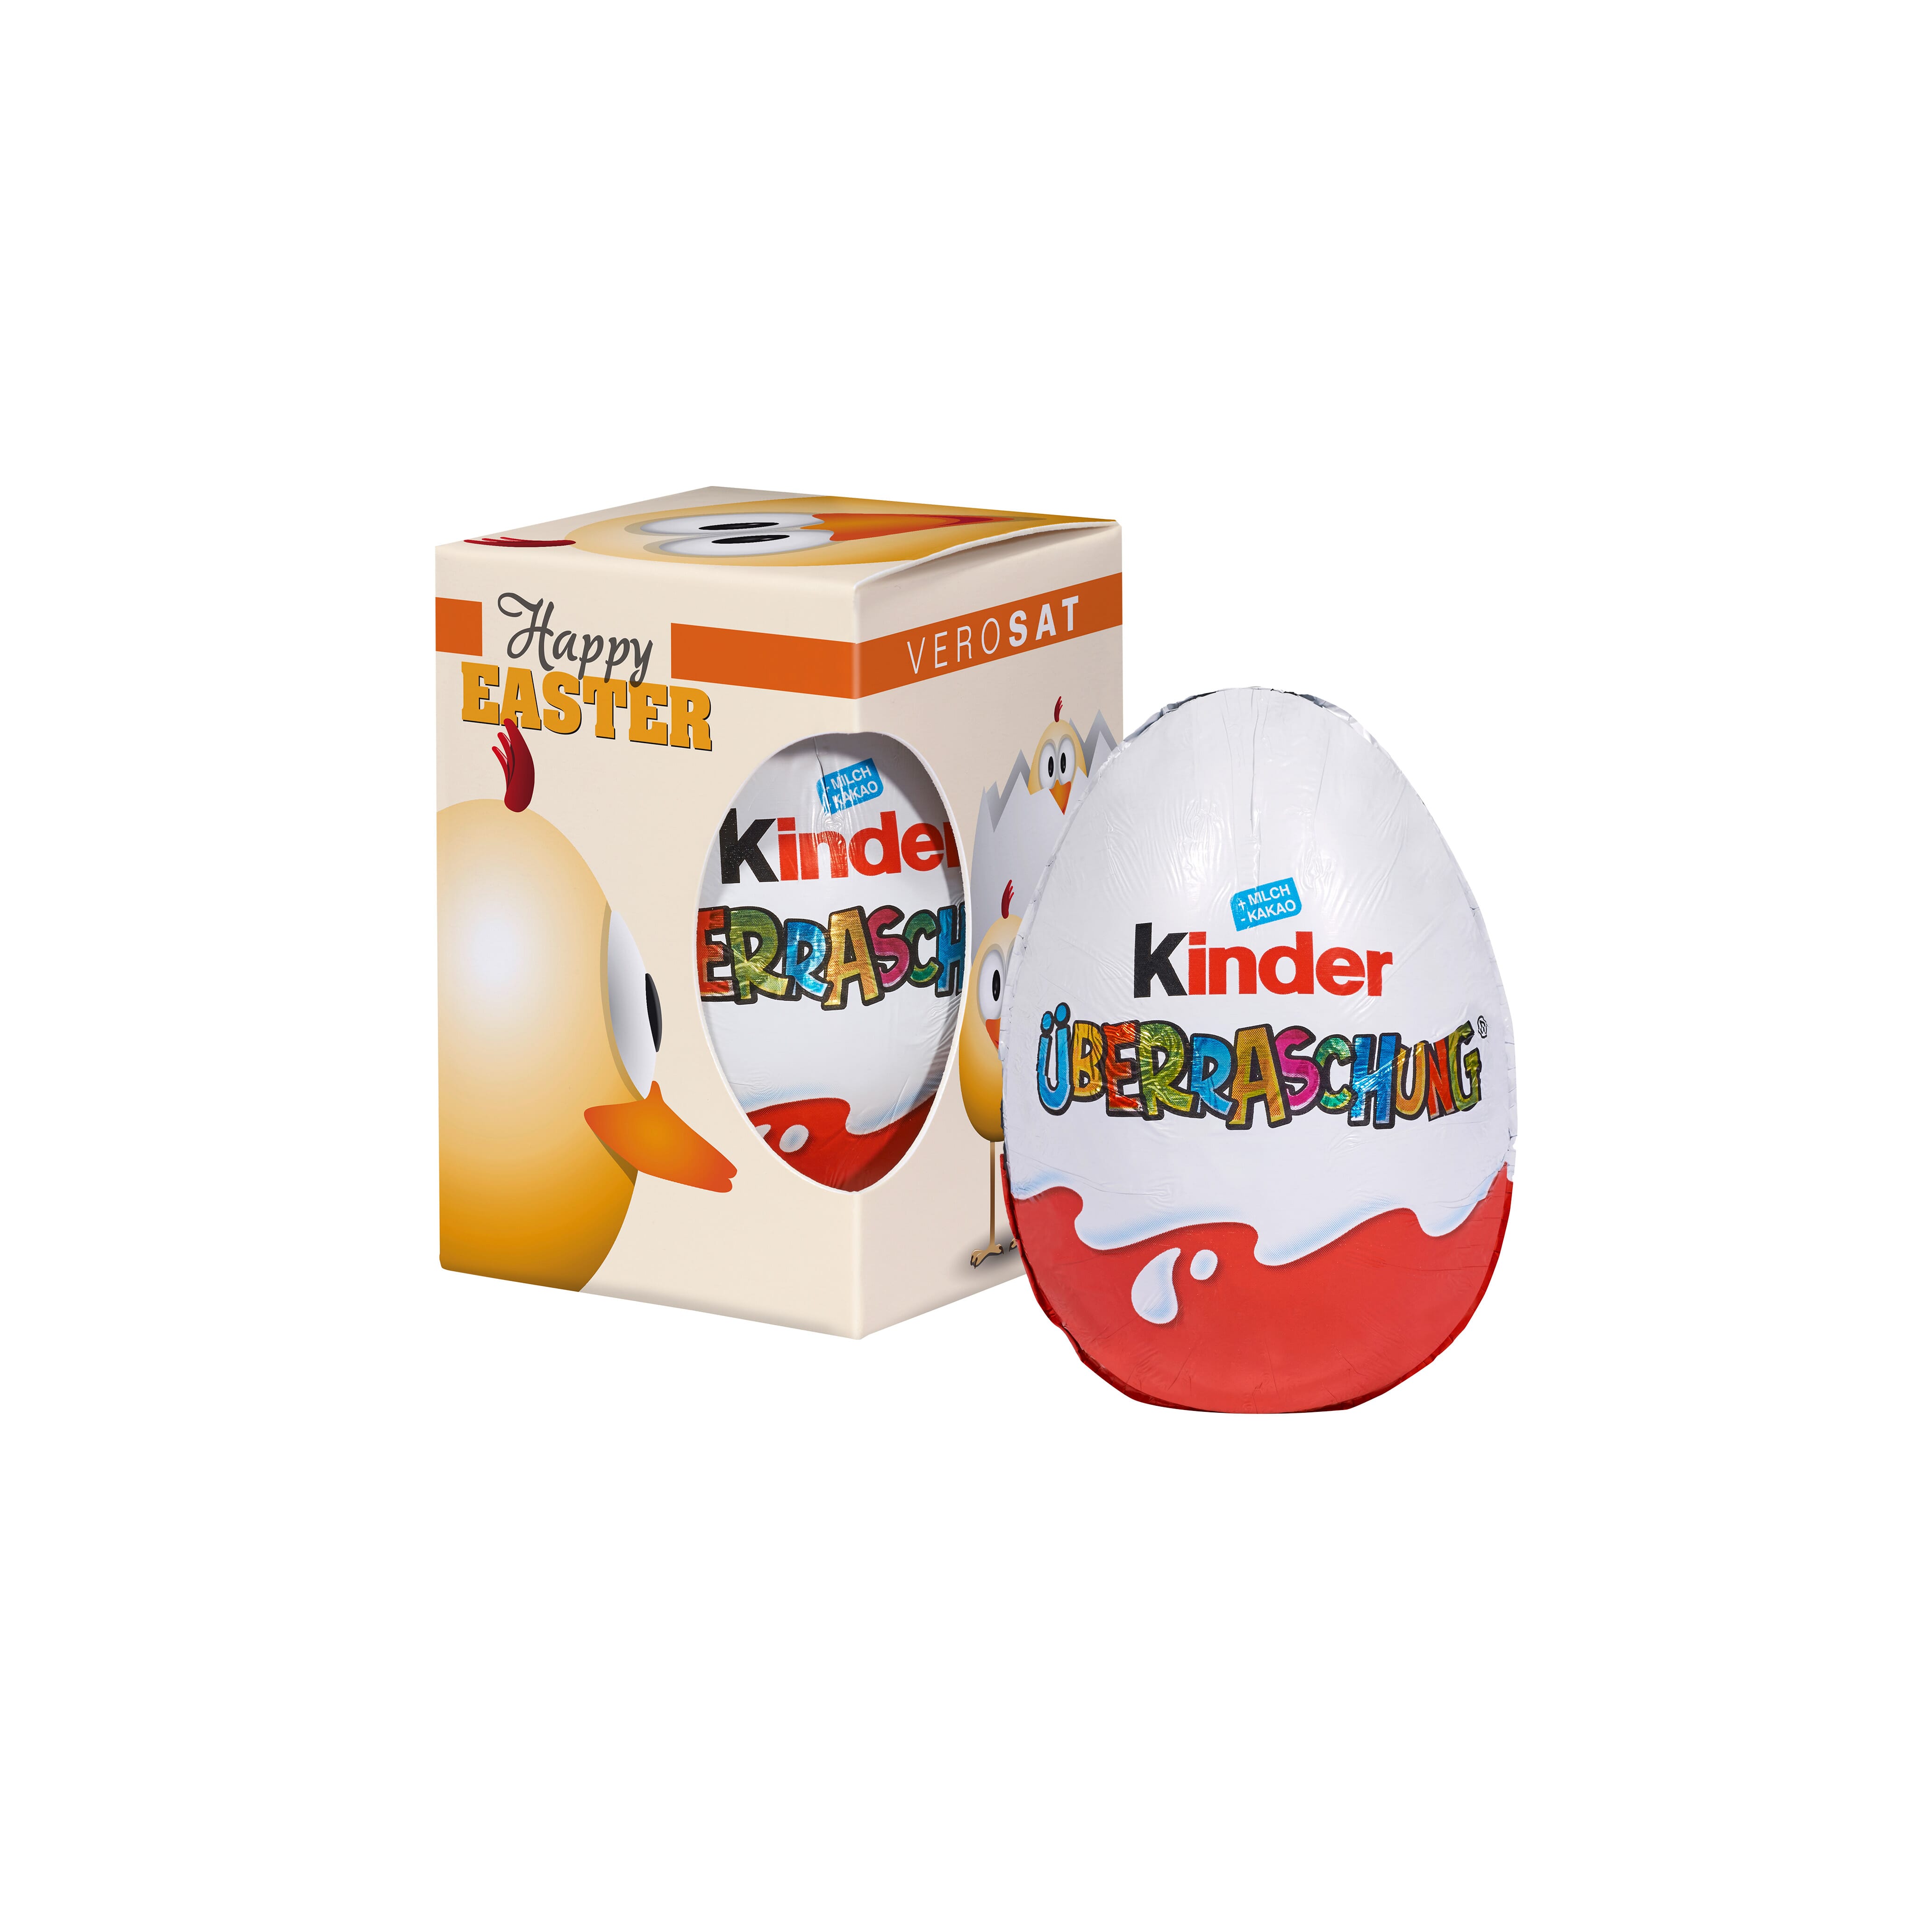 Printed box with Kinder Surprise